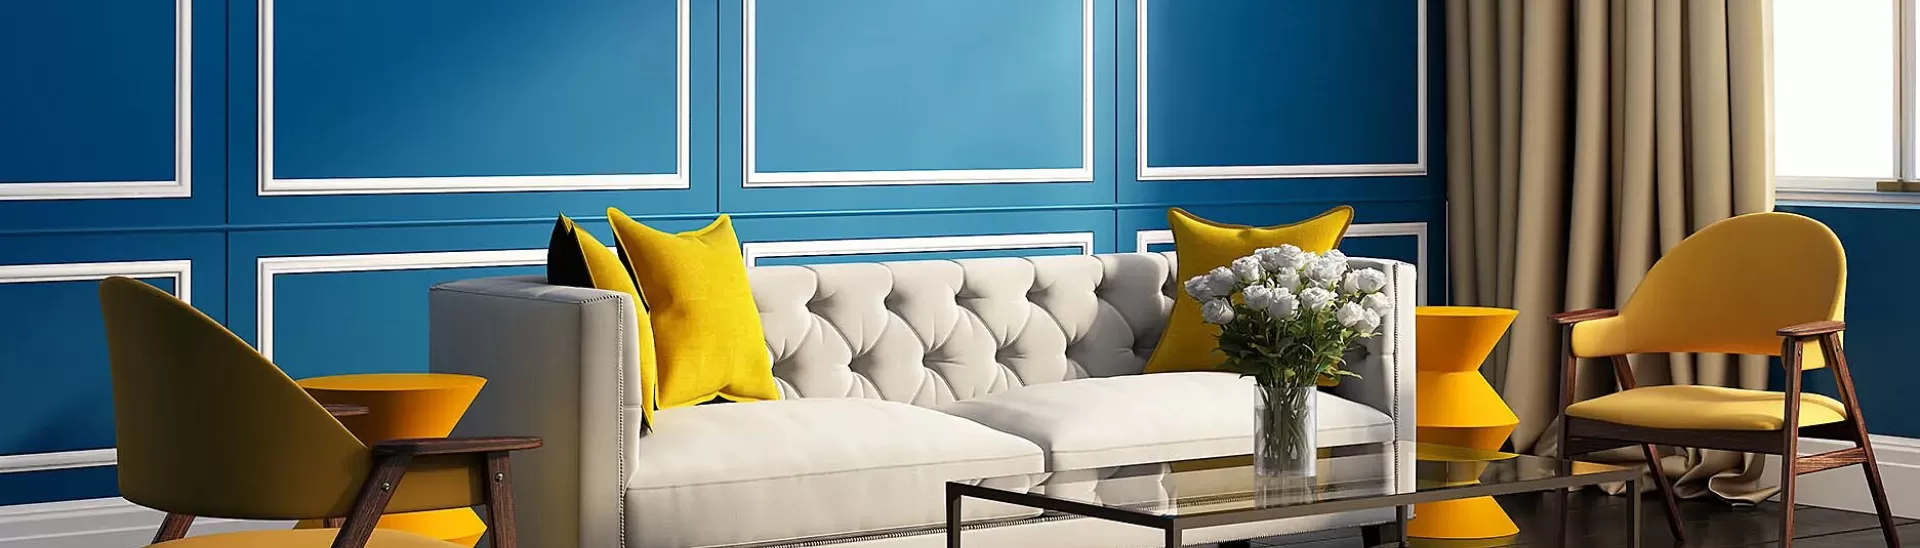 Sky Blue Is The Color Of The Season: Here's Why We Love It